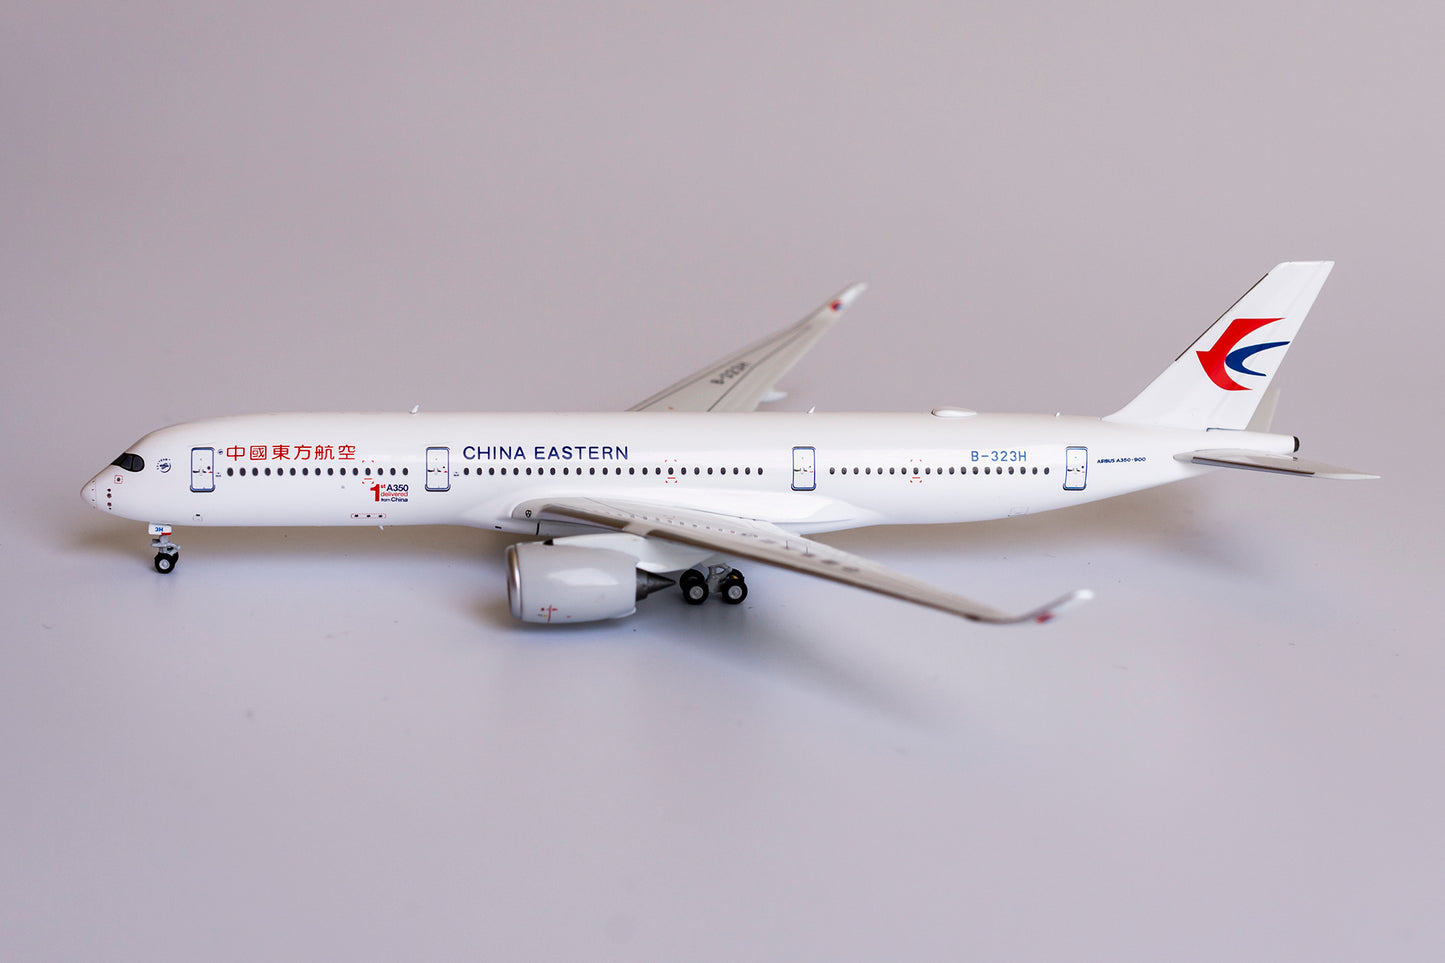 1:400 NG Models China Eastern Airlines Airbus A350-900 1st A350 delivered from China" B-323H NG39022